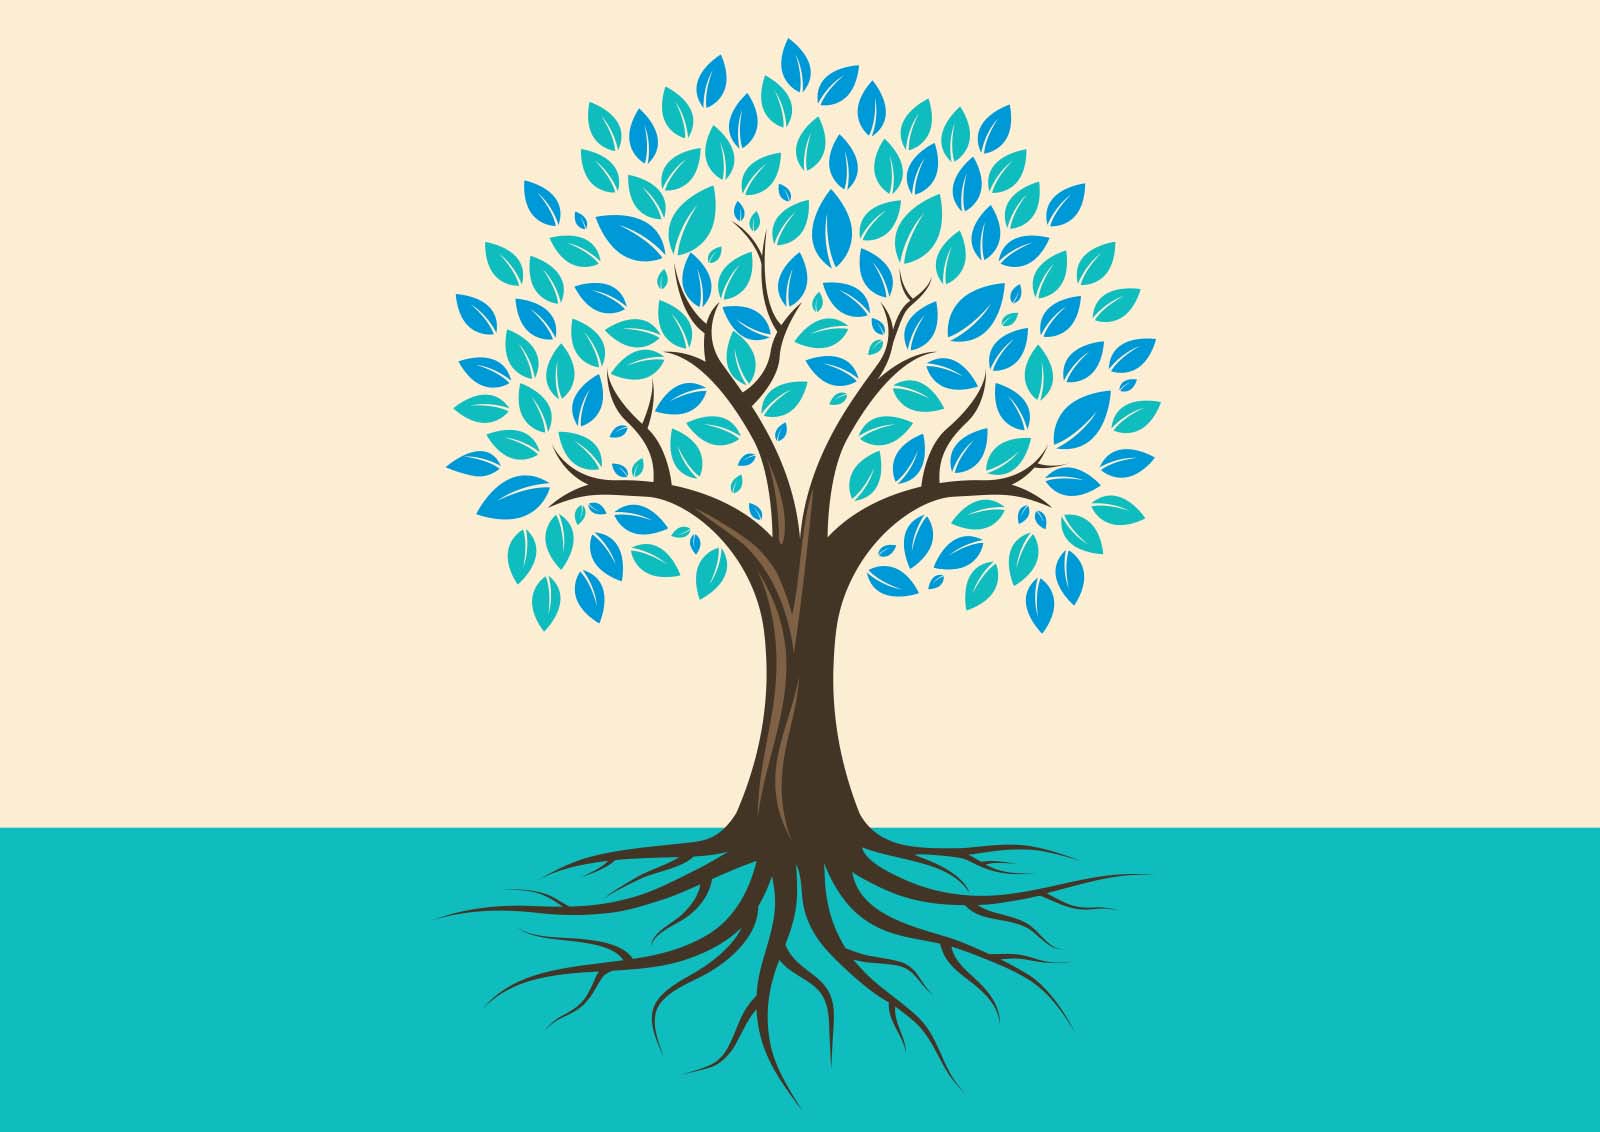 Illustration of a tree visualizing strong roots and leaves.